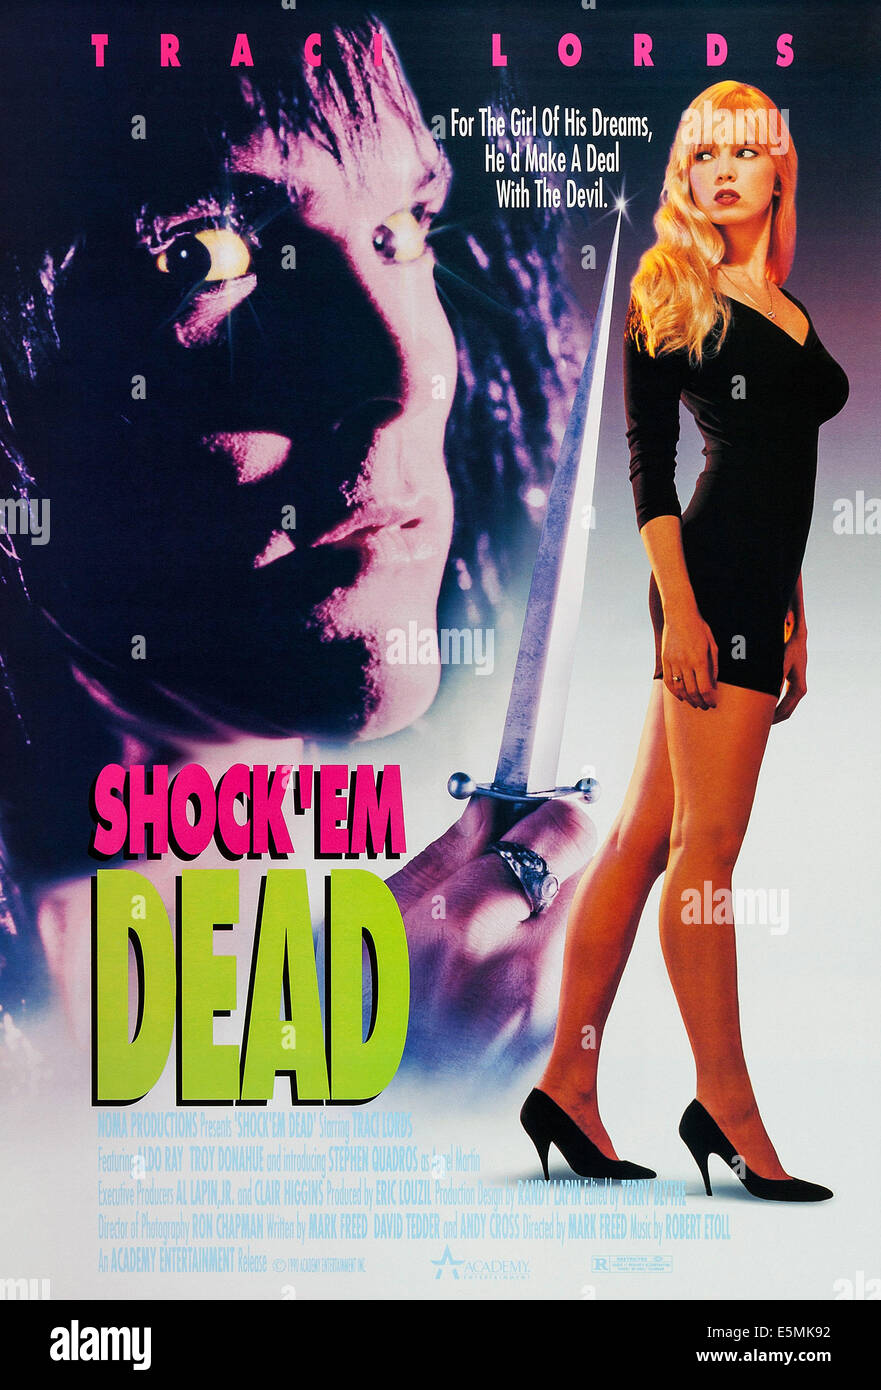 SHOCK 'EM DEAD, US poster, from left: Stephen Quadros, Traci Lords, 1991, © Academy Entertainment/courtesy Everett Collection Stock Photo